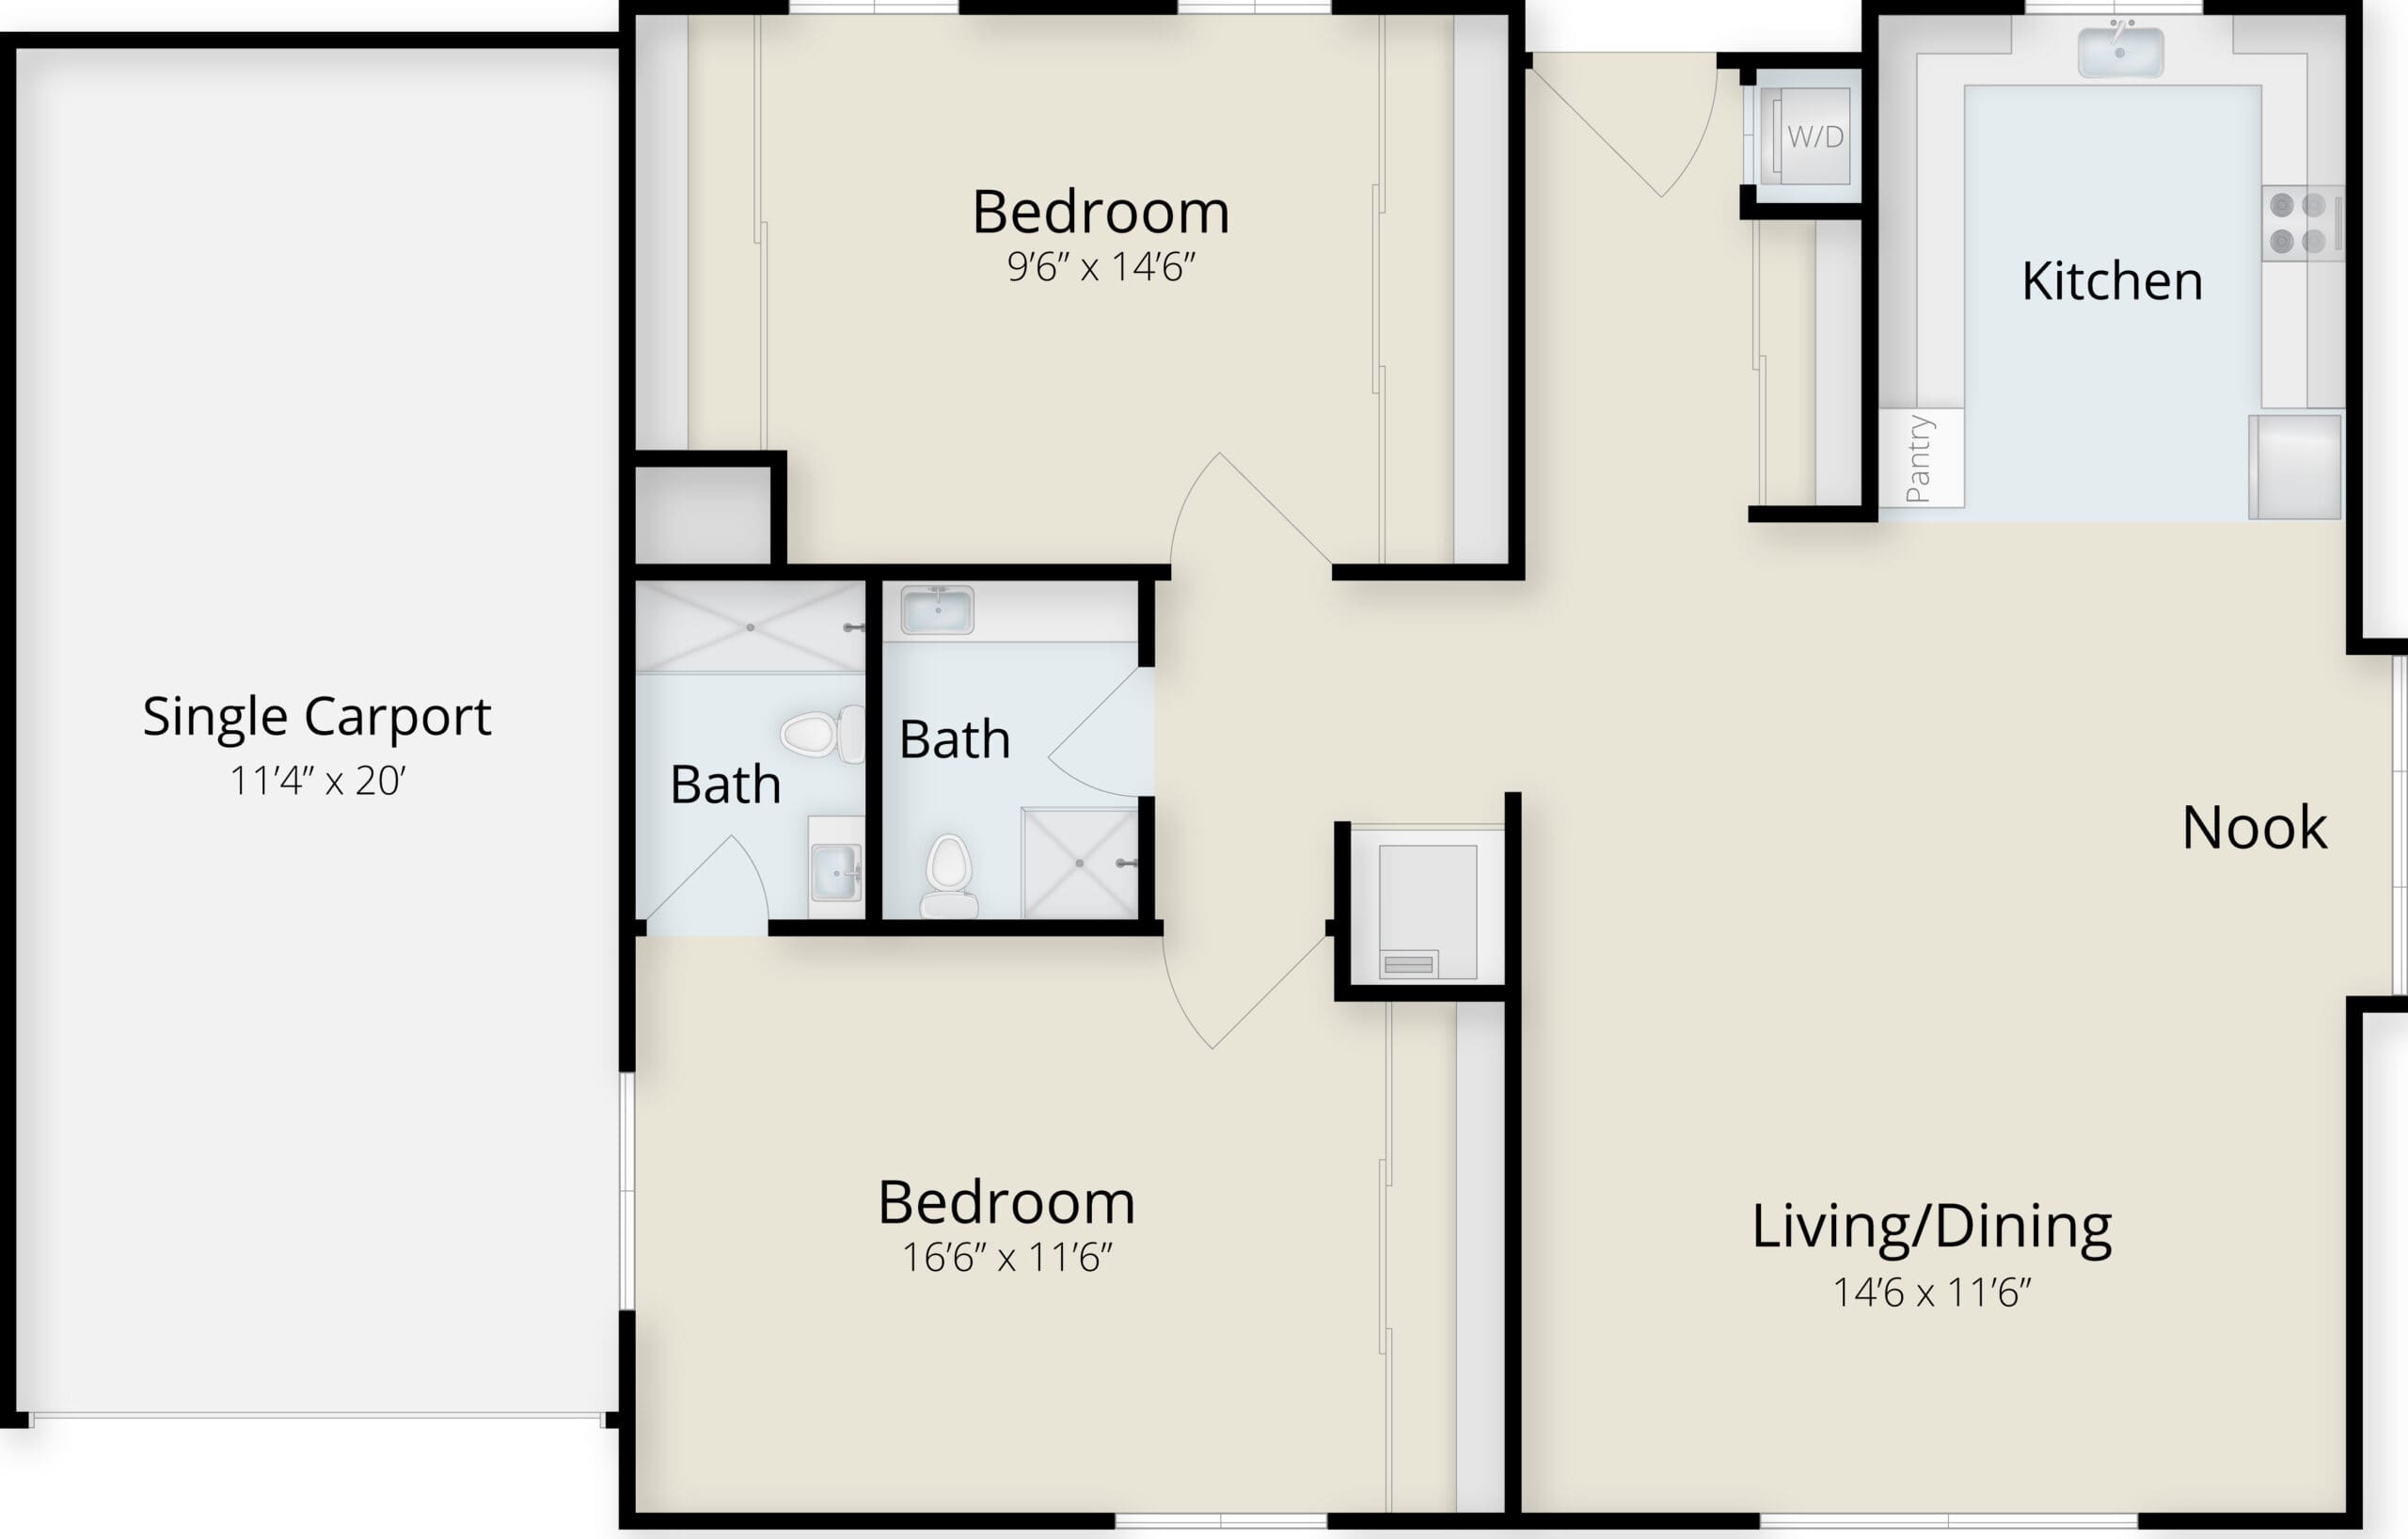 Two bedroom two bath cottage floor plan 960 sq ft